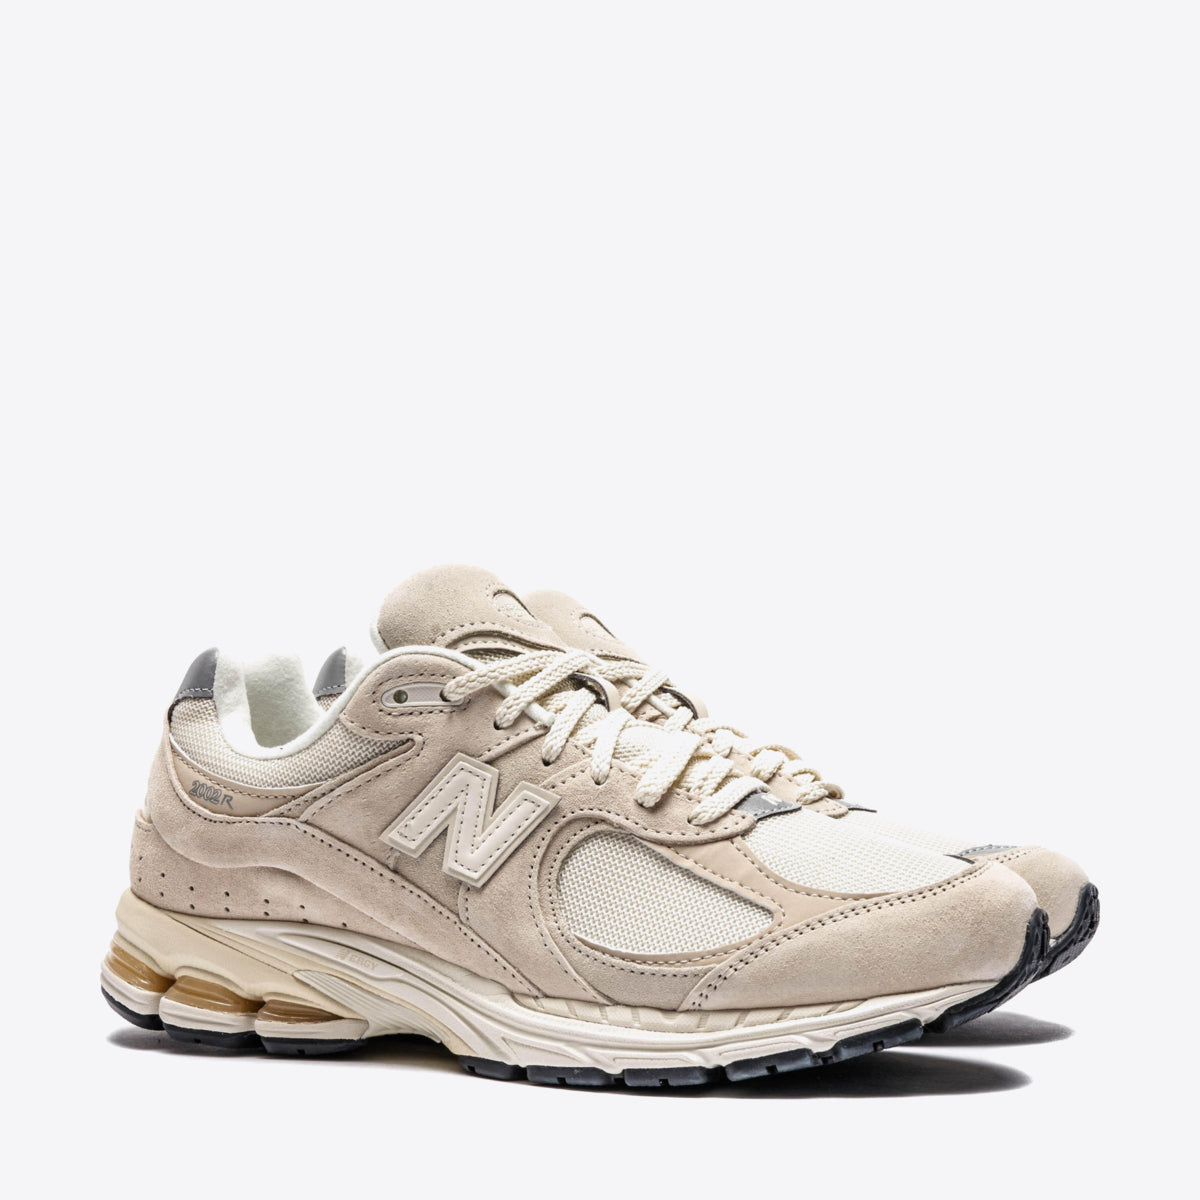 NEW BALANCE 2002R Sneaker Calm Taupe - Image 2